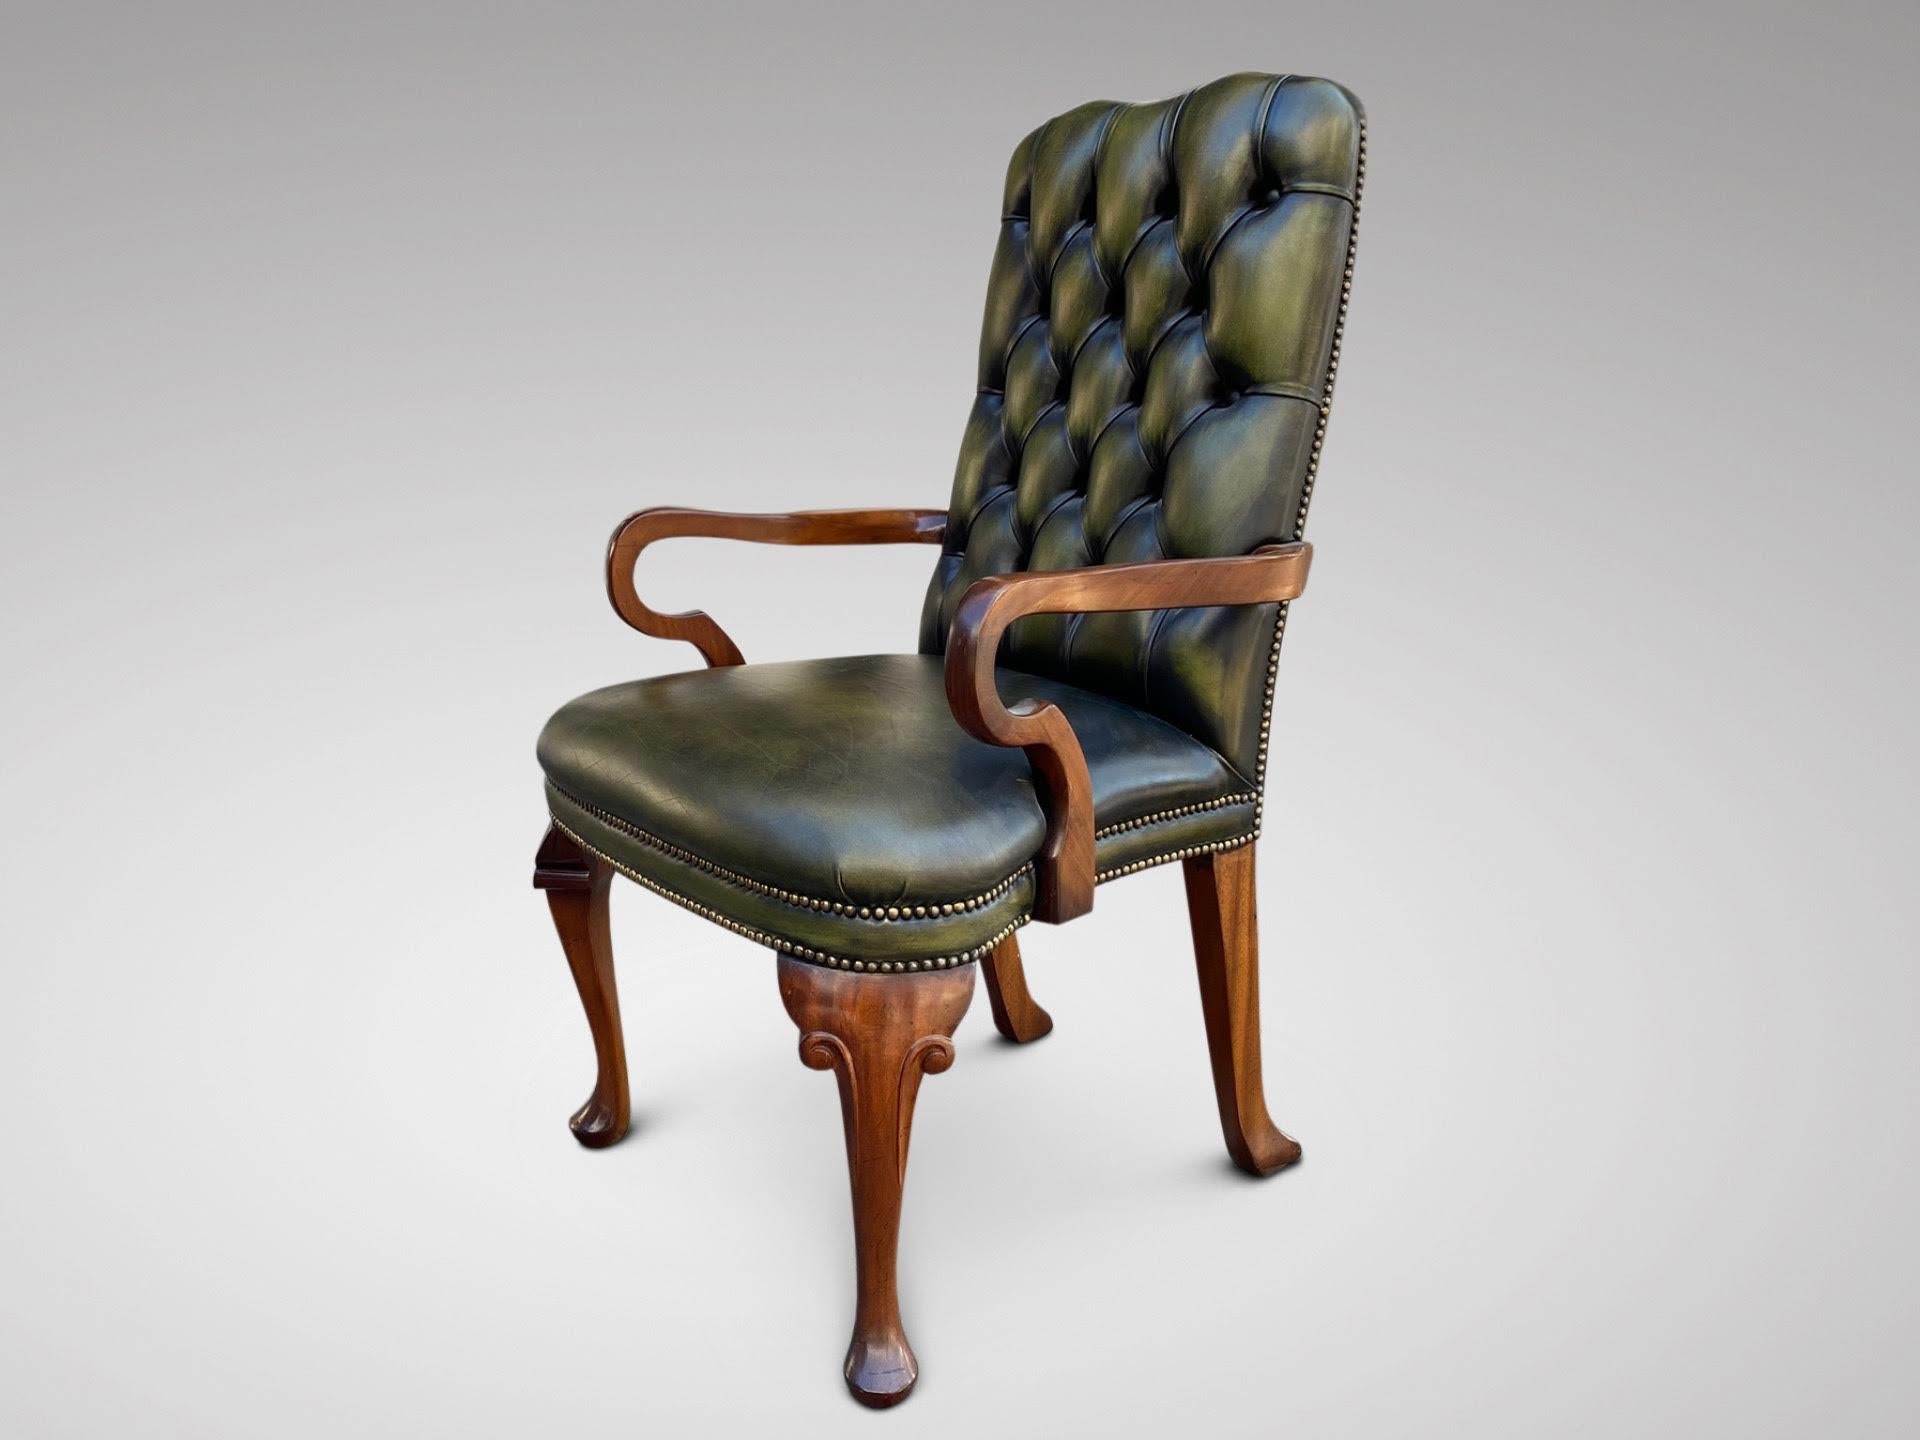 A mid 20th century superb quality Queen Anne style solid mahogany hand-dyed green leather and brass studs armchair, beautifully shaped curved arms, cabriole front legs with a carved knee and pad feet. A very sturdy armchair in excellent condition.